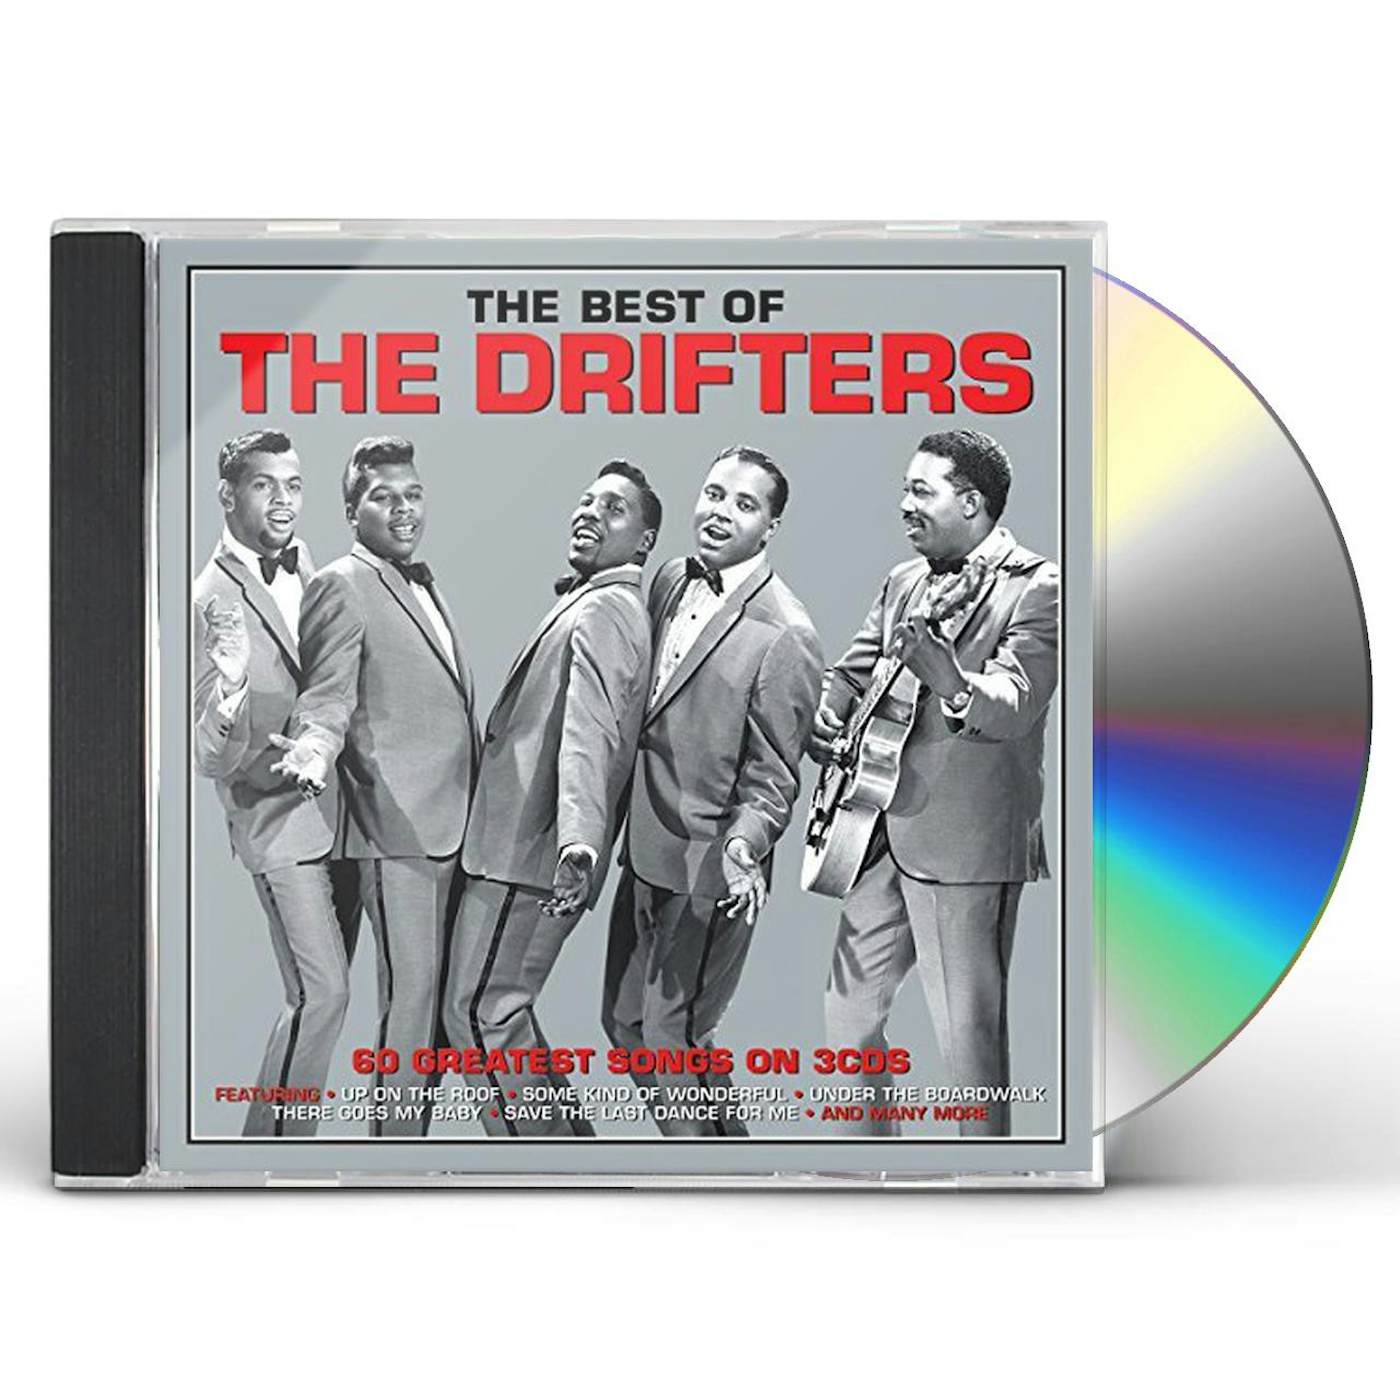 The Drifters BEST OF CD